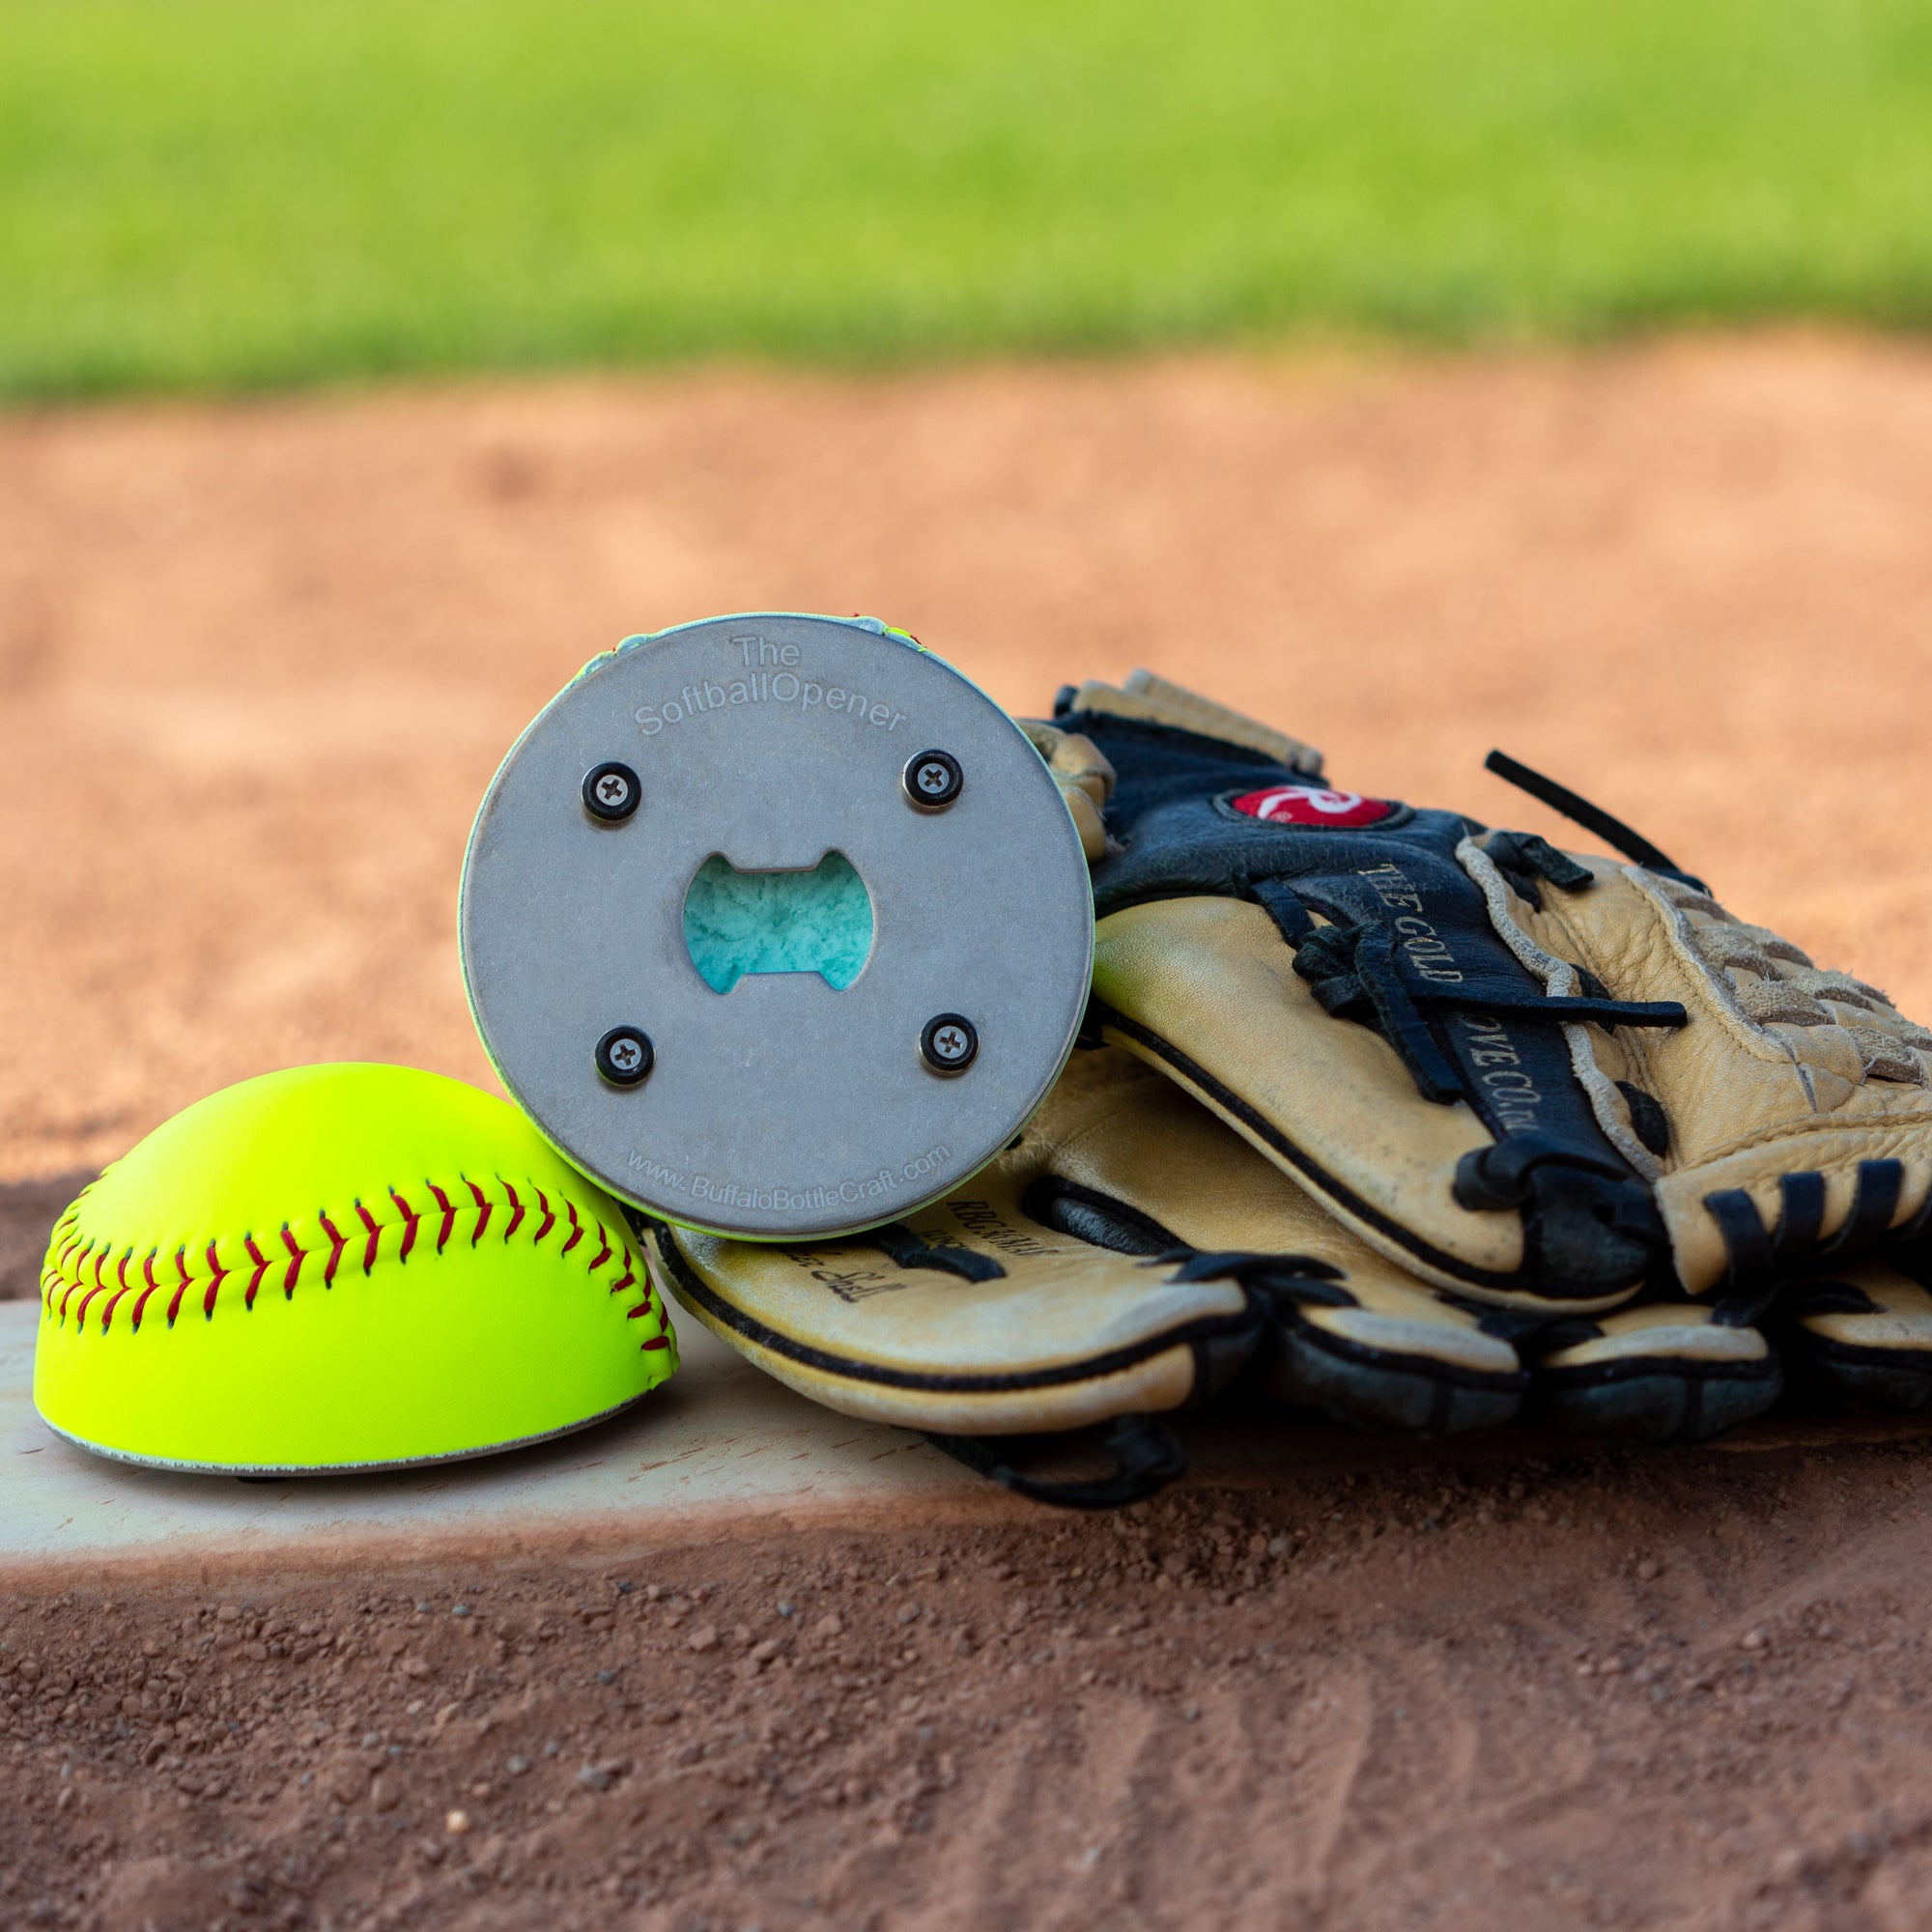 Softball Opener and Glove Resting on Plate